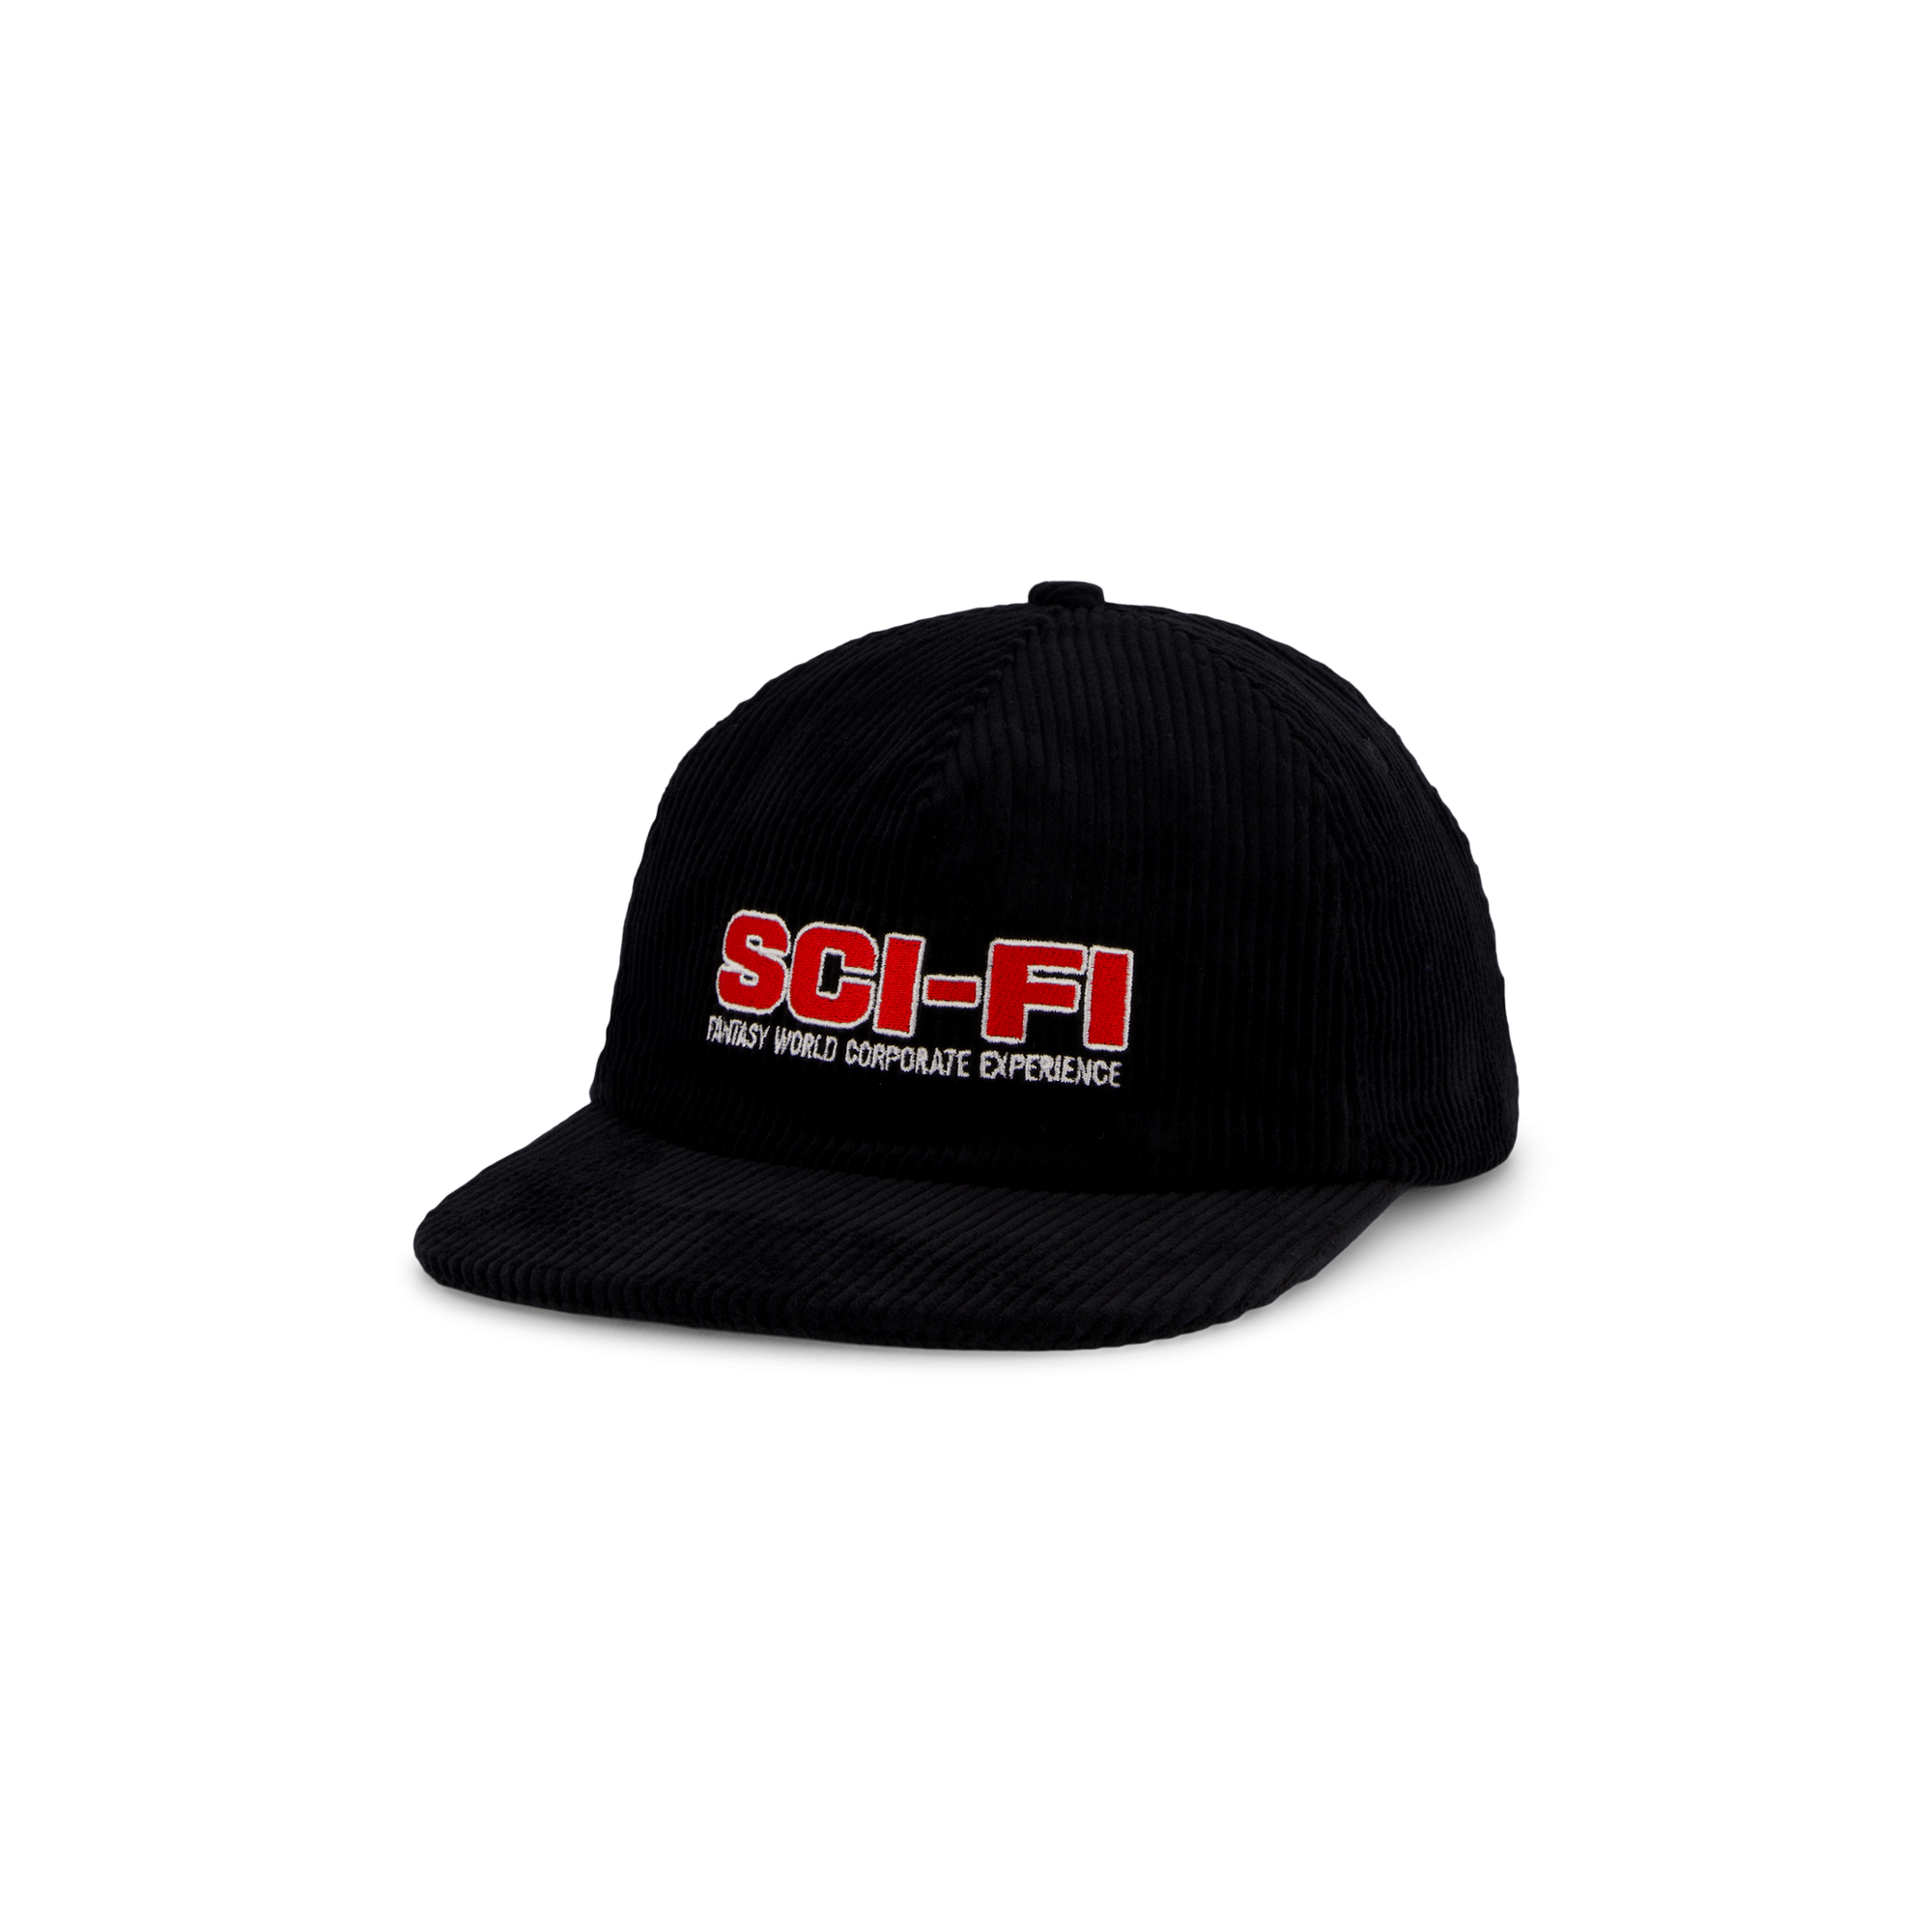 Corporate Experience Hat Black